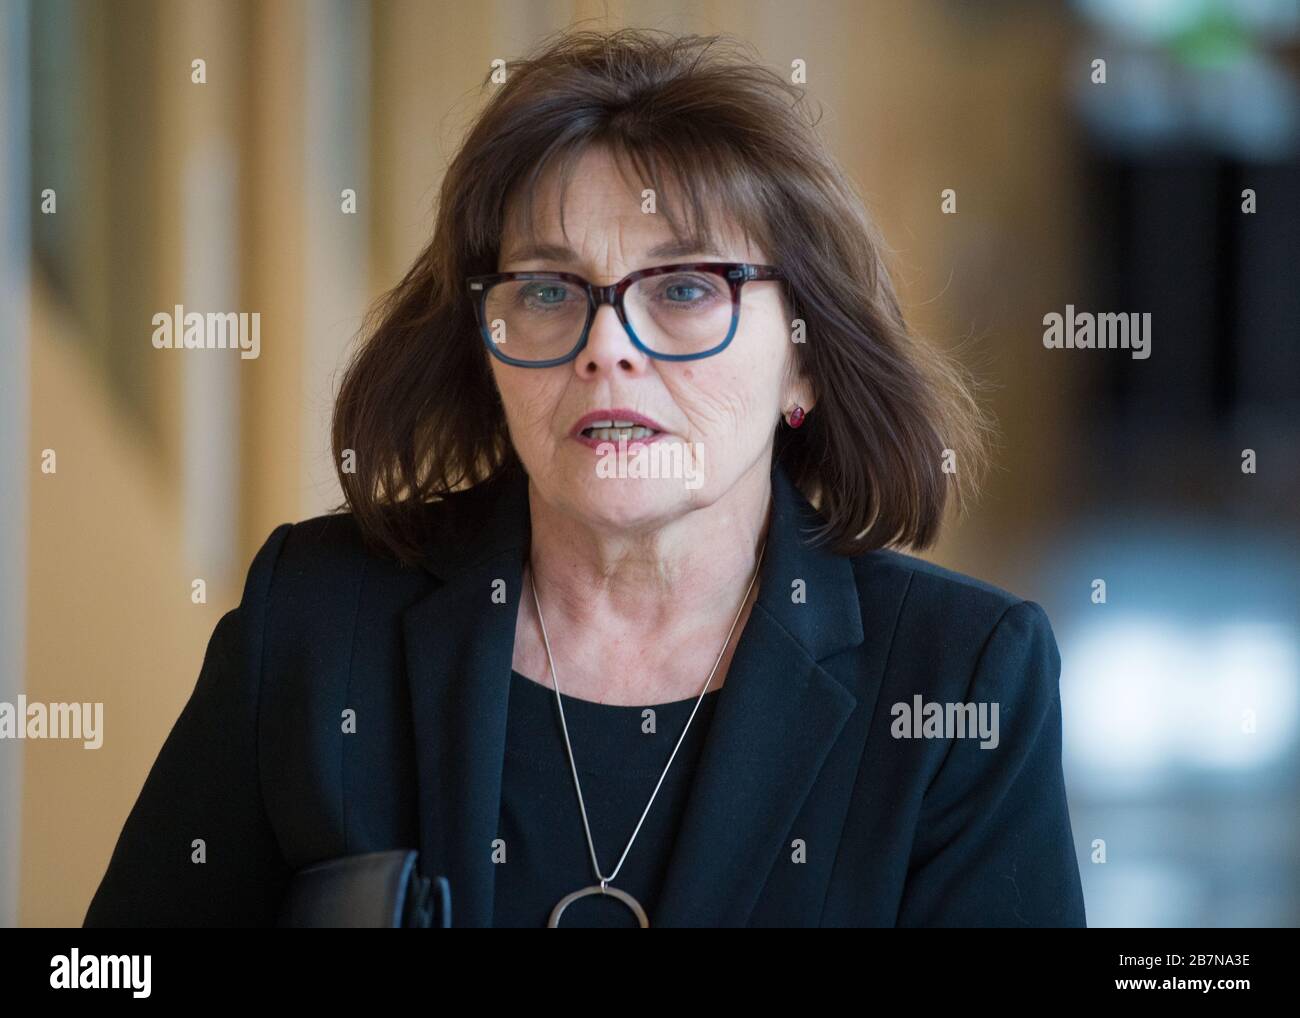 Edinburgh, UK. 17th Mar, 2020. Pictured: Jeane Freeman MSP - Cabinet Minister for Health and Sport. Ministerial Statement: Novel coronavirus COVID-19 update Credit: Colin Fisher/Alamy Live News Stock Photo